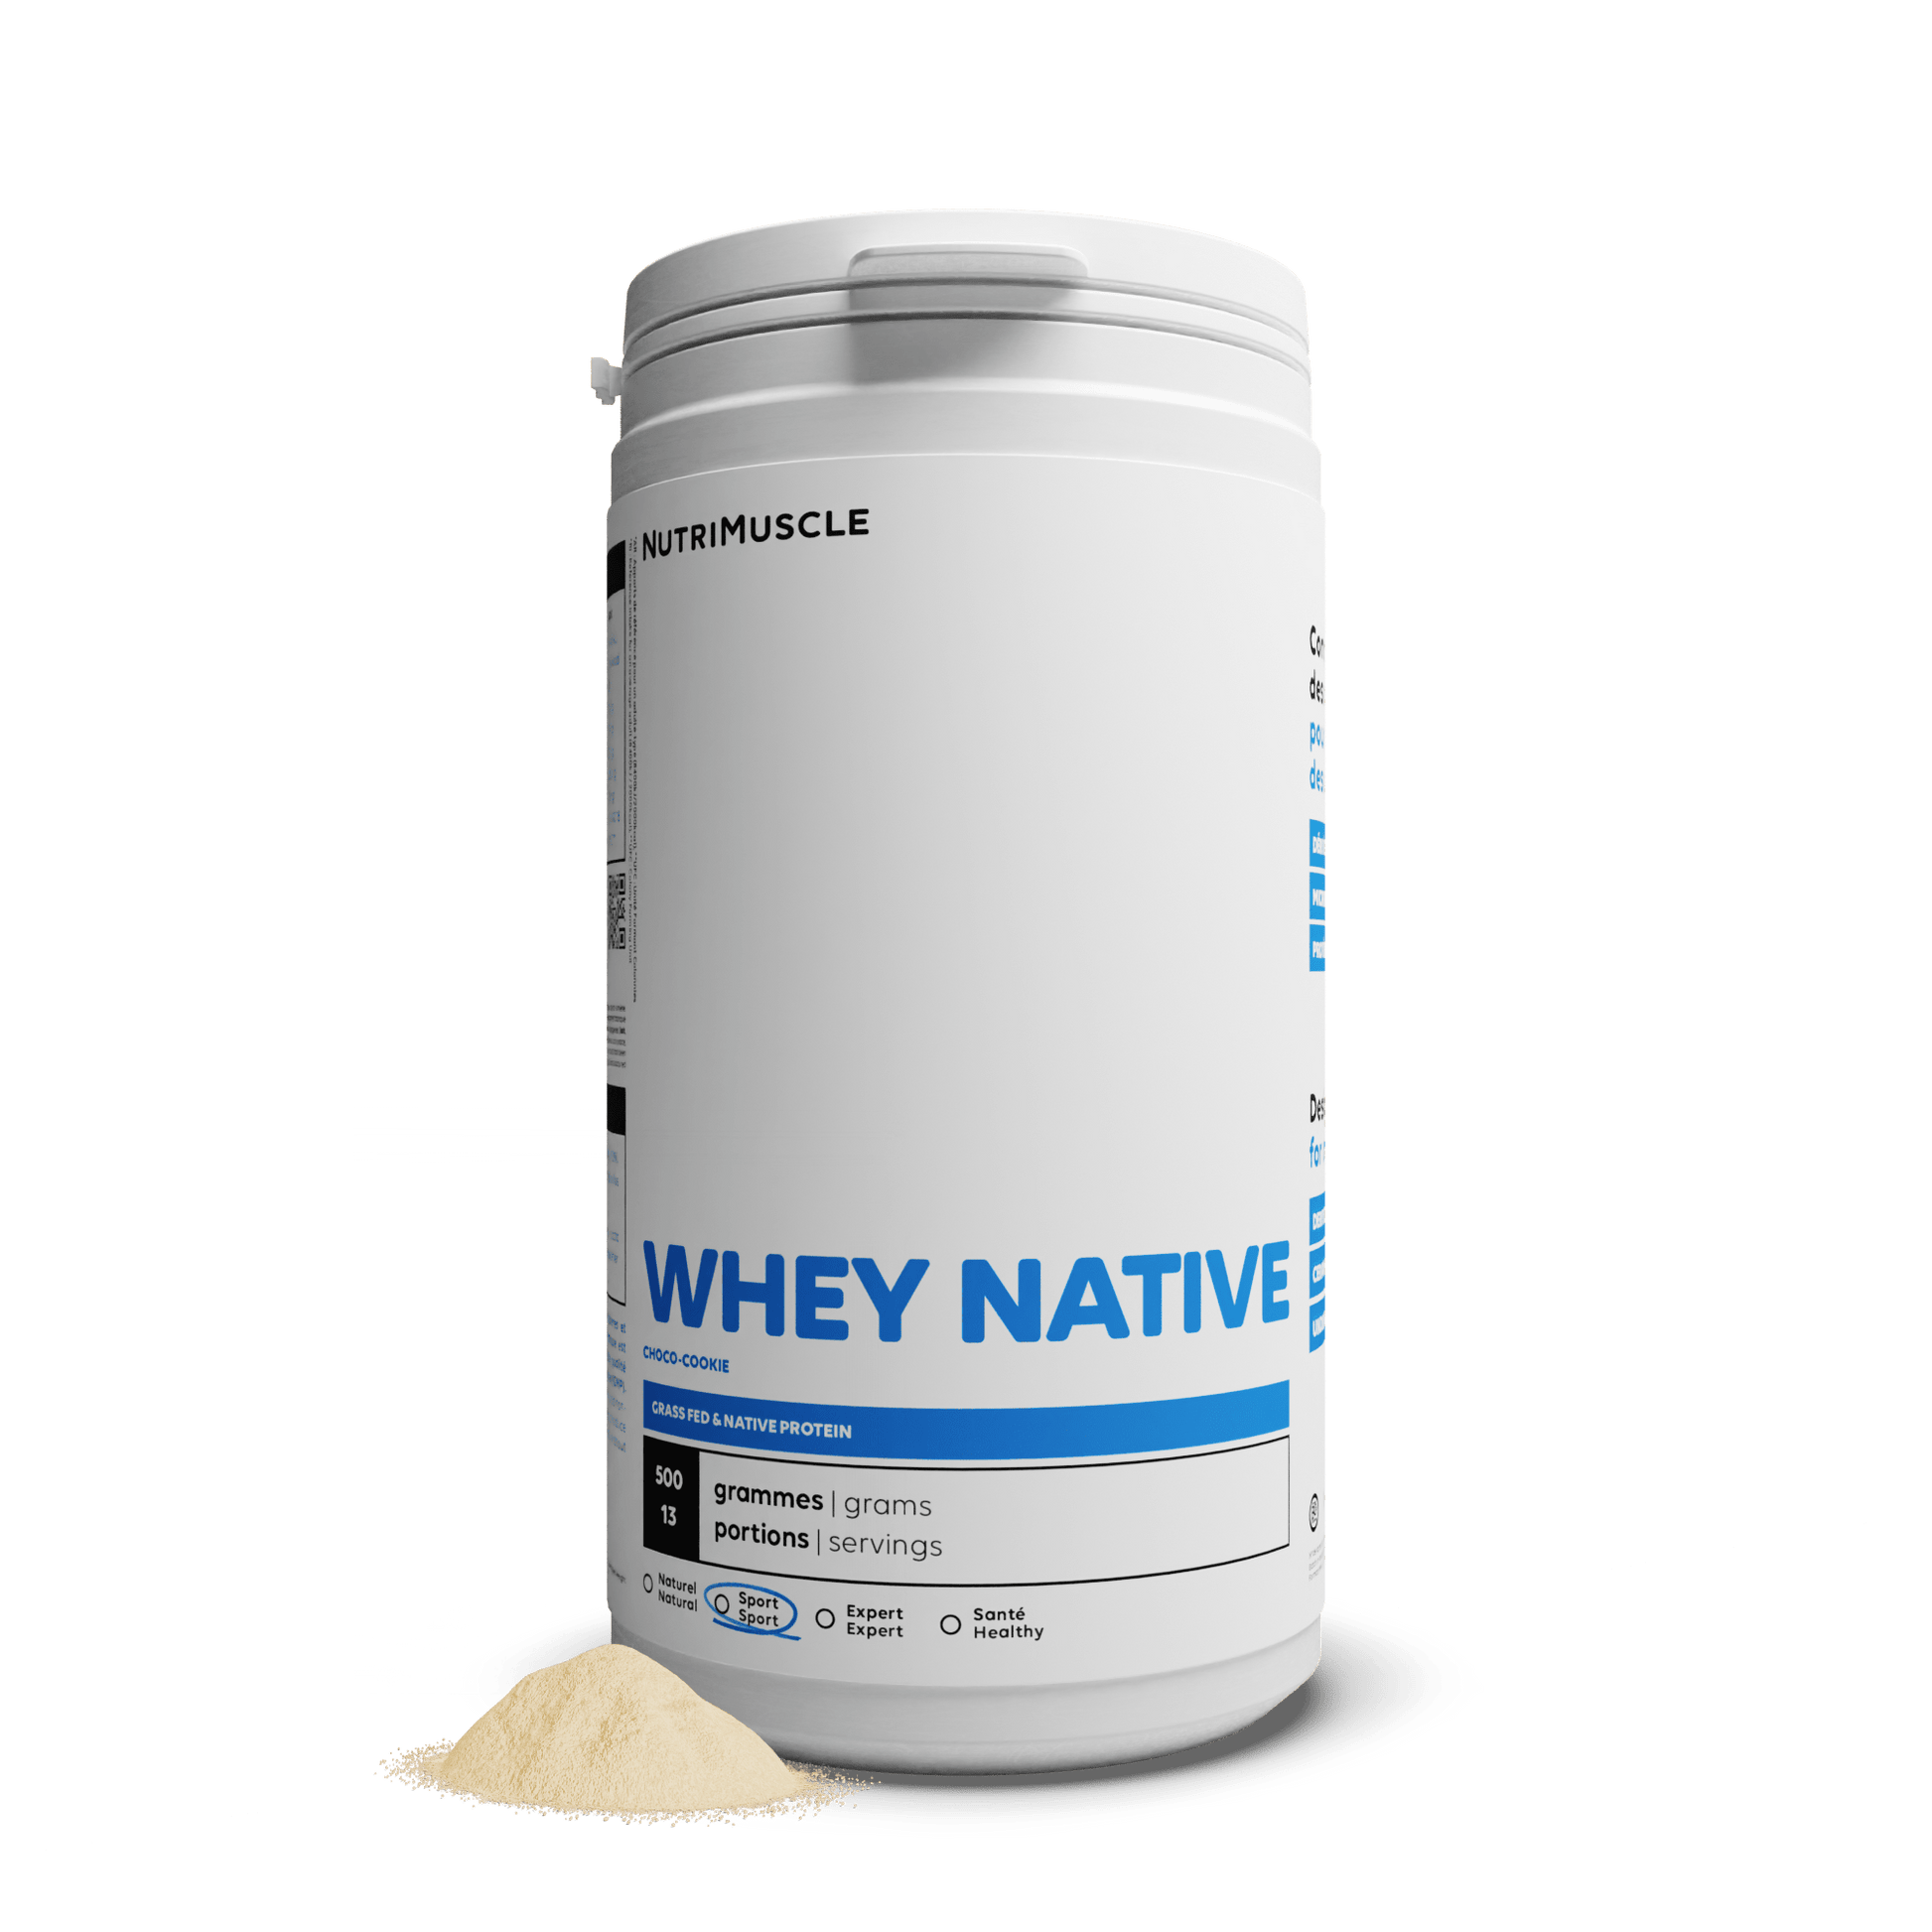 Nutrimuscle Protéines Choco cookie / 500 g Whey Native